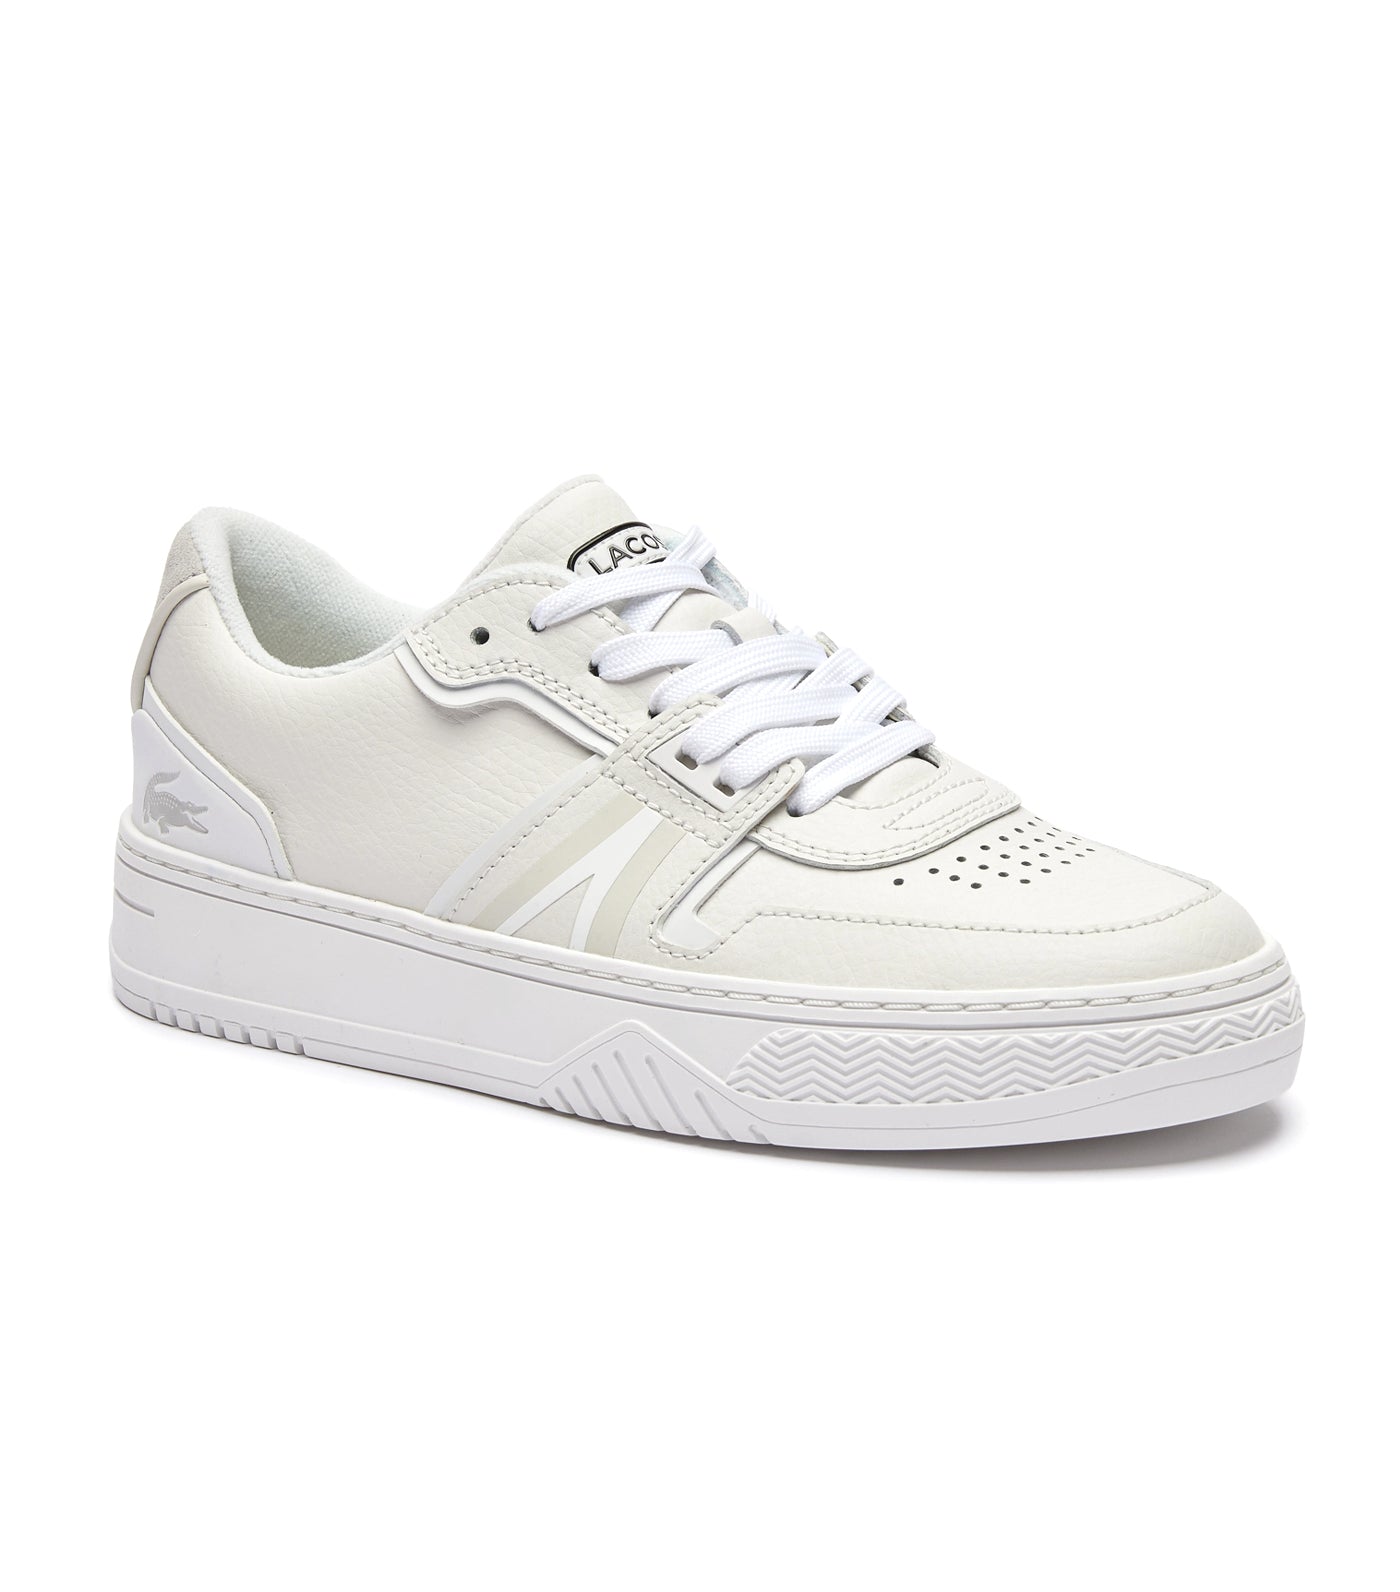 Men's L001 0321 1 Leather Sneakers White/Off White